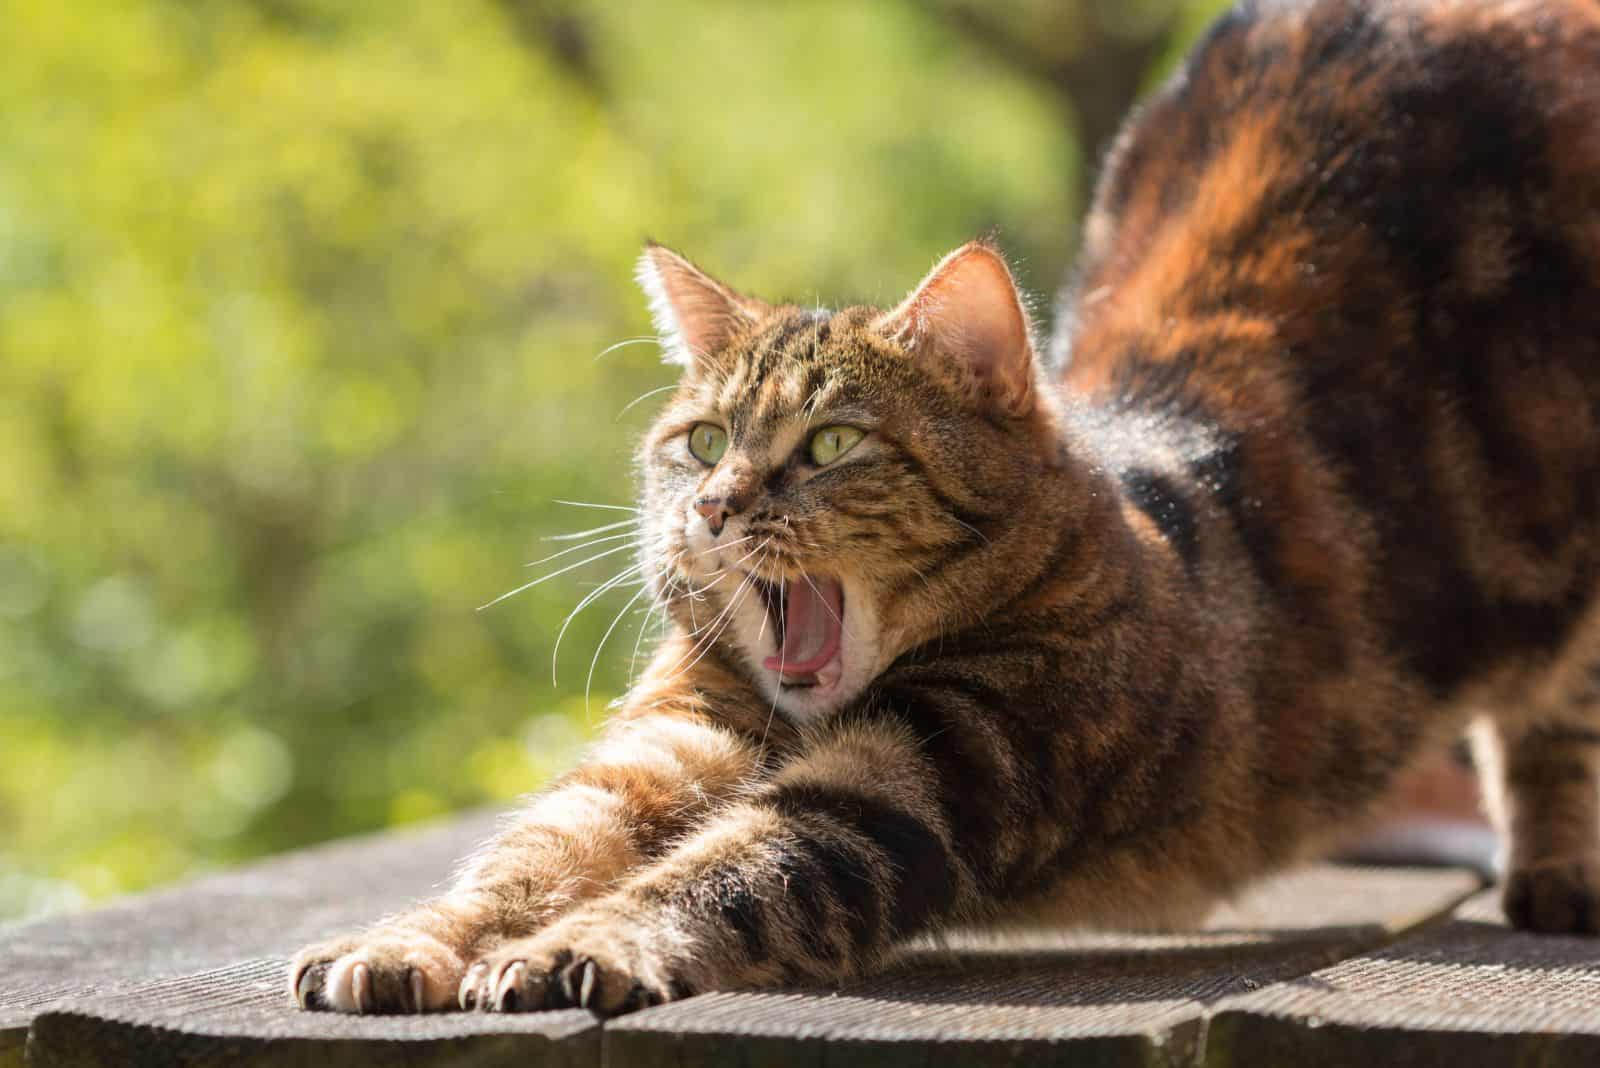 cat stretching and yawning